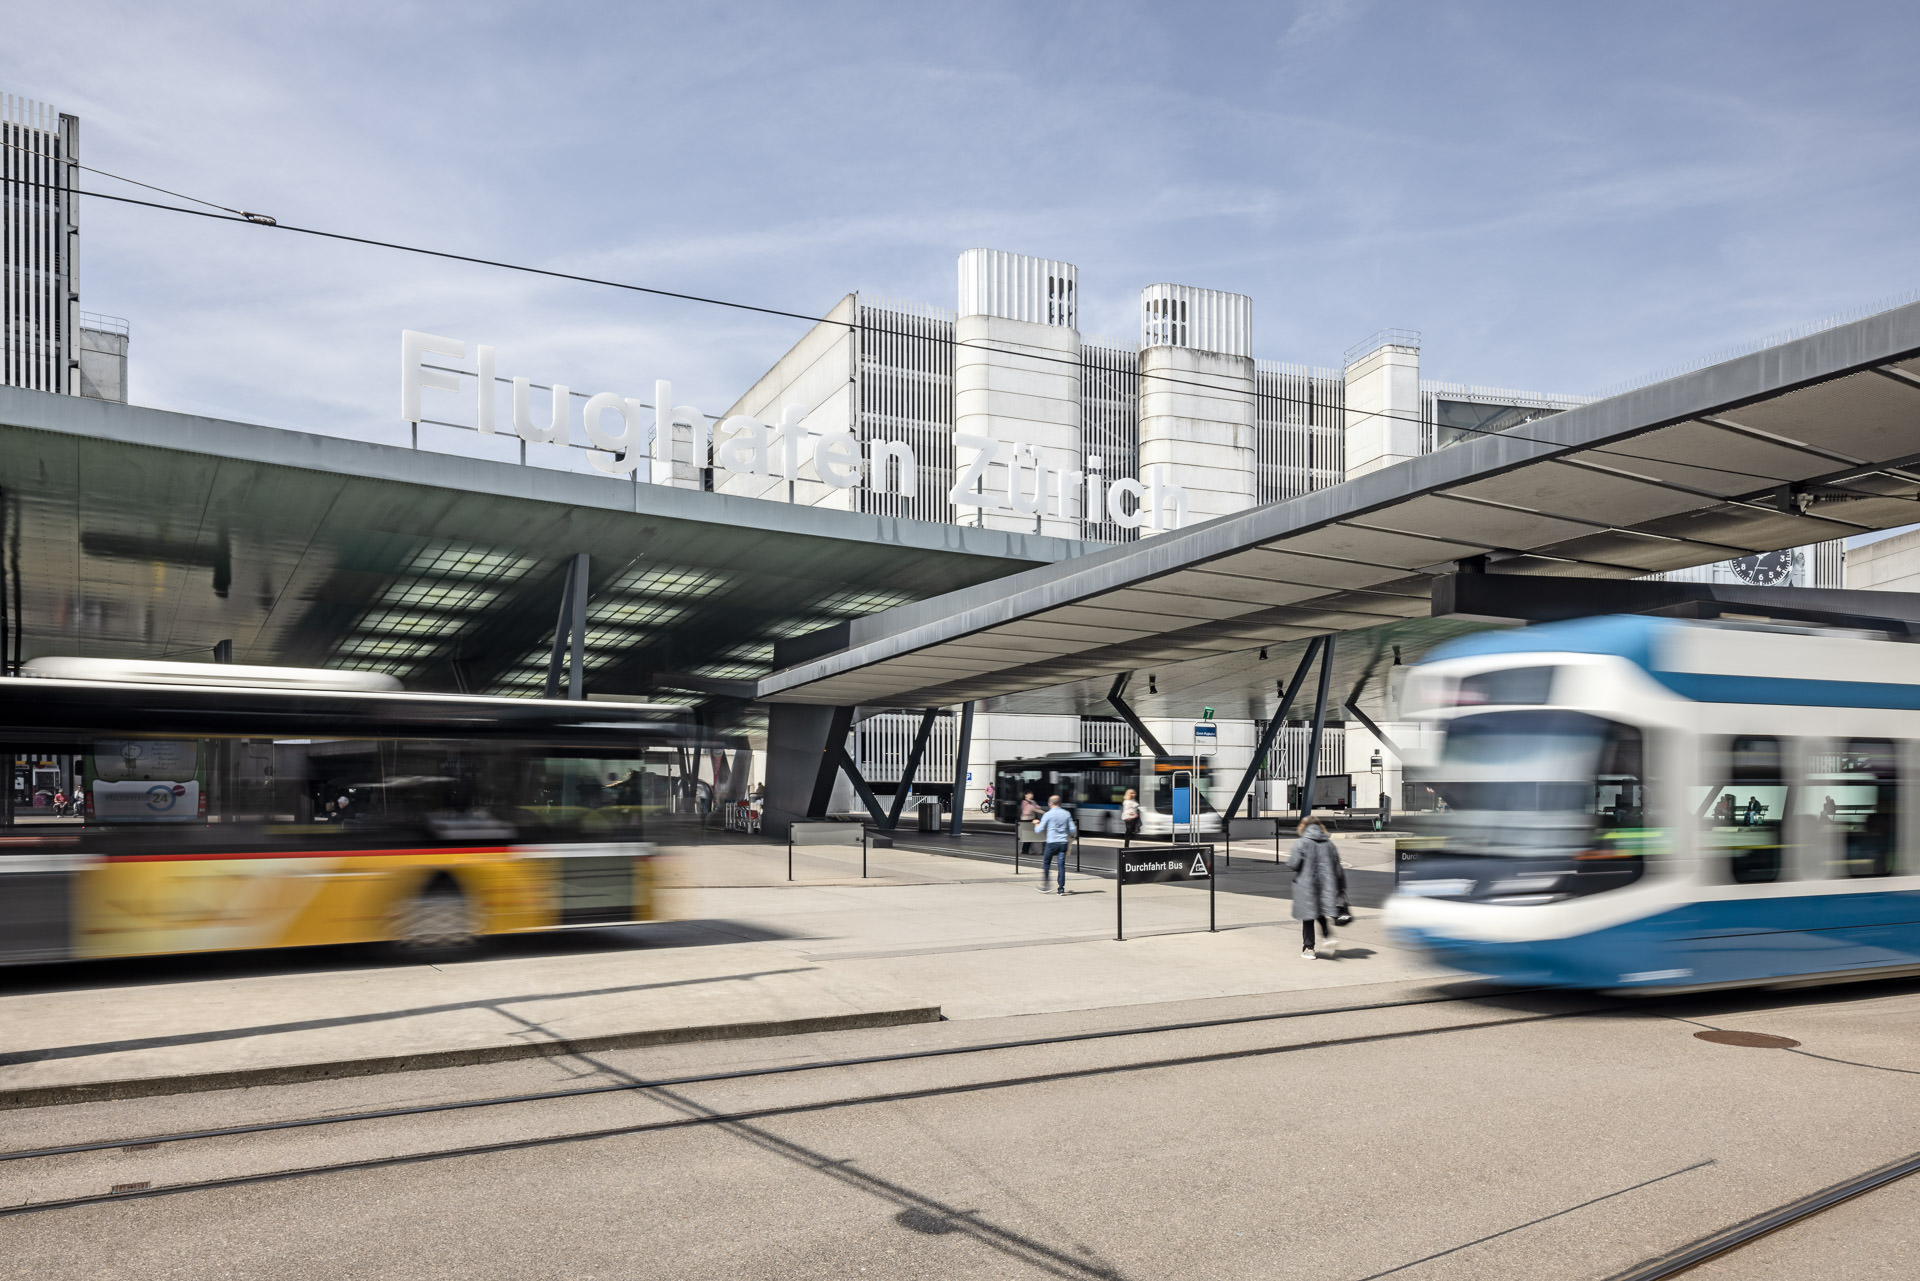 Airport Zurich public transportation hub, tram & bus station, car parking, bus and tram in motion